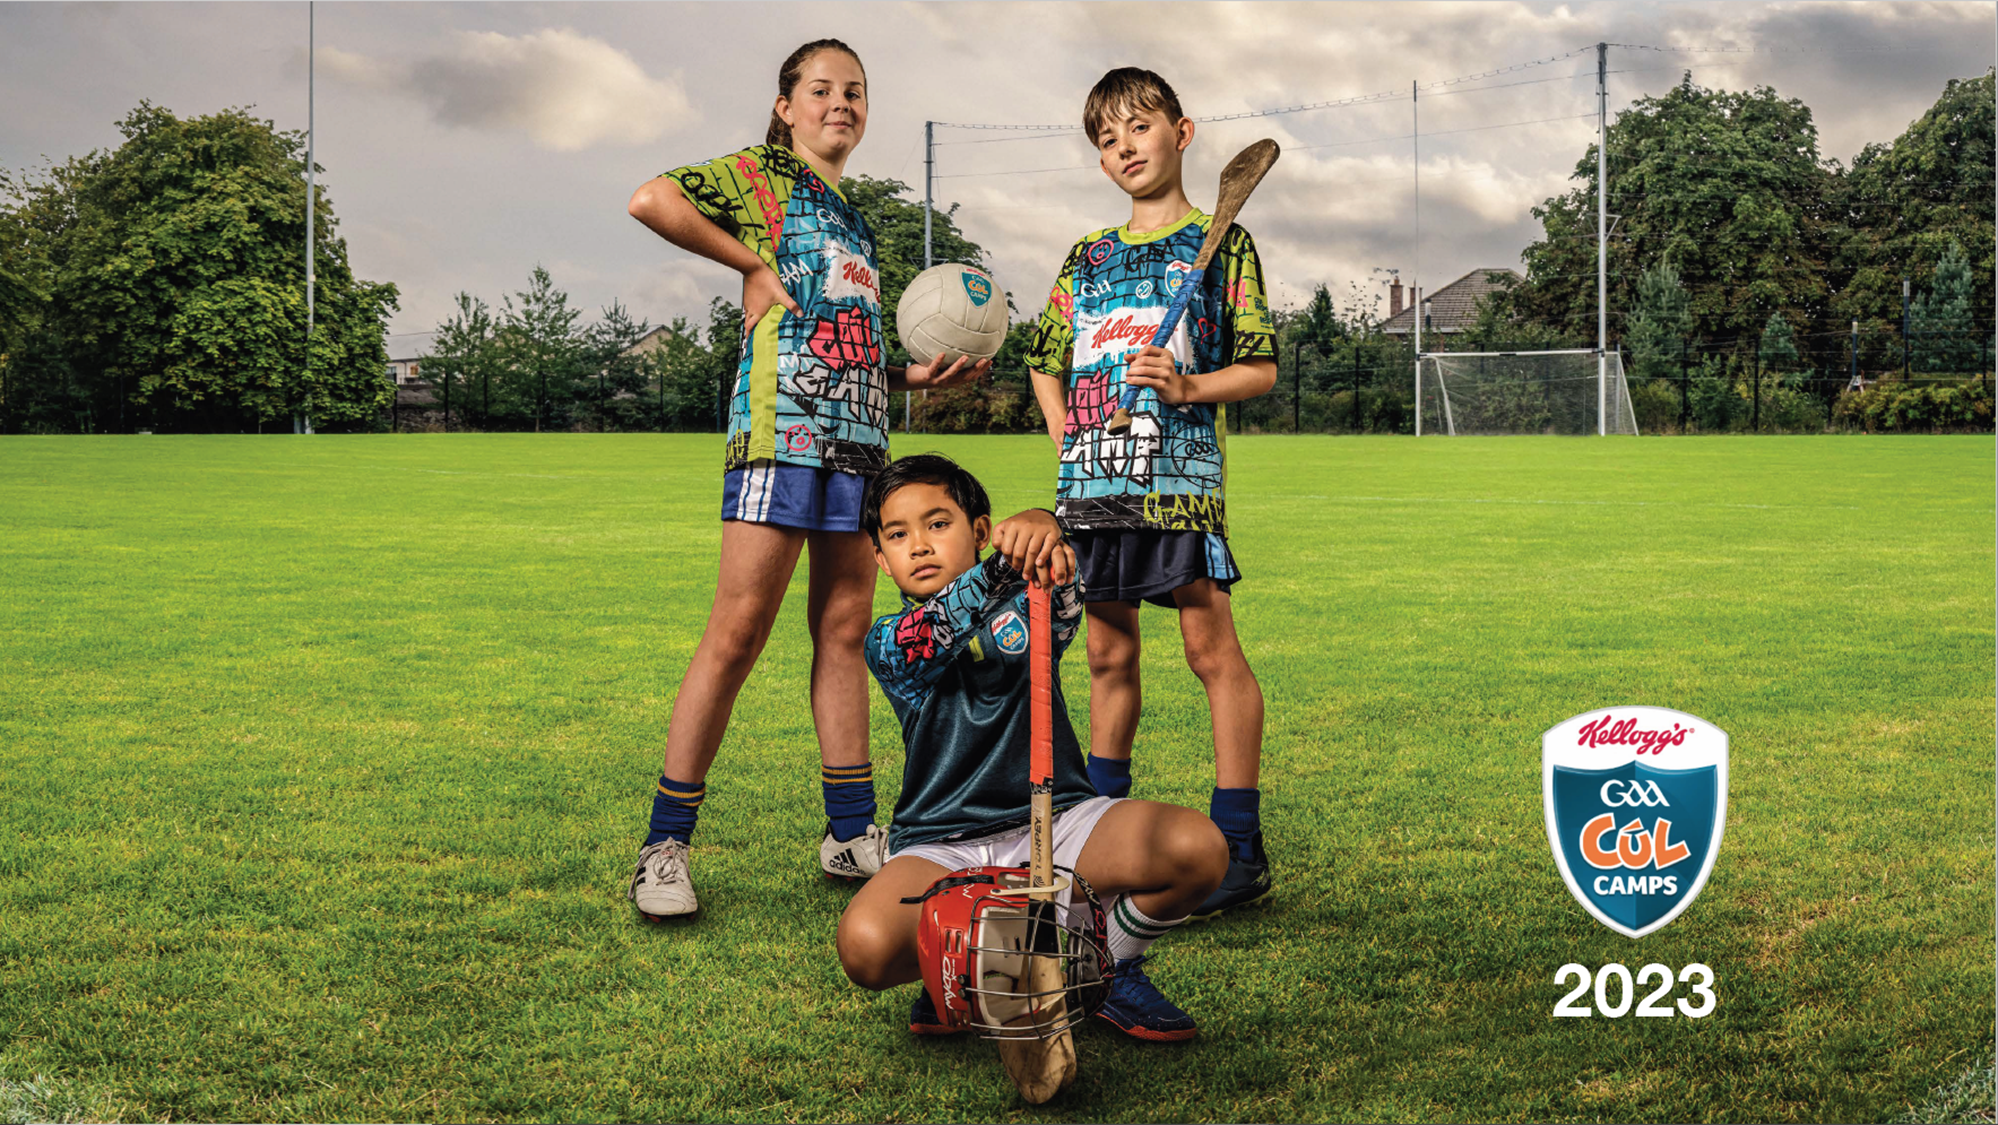 Kelloggs Cúl Camps 2023 – 23rd May Closing Date for Coaches